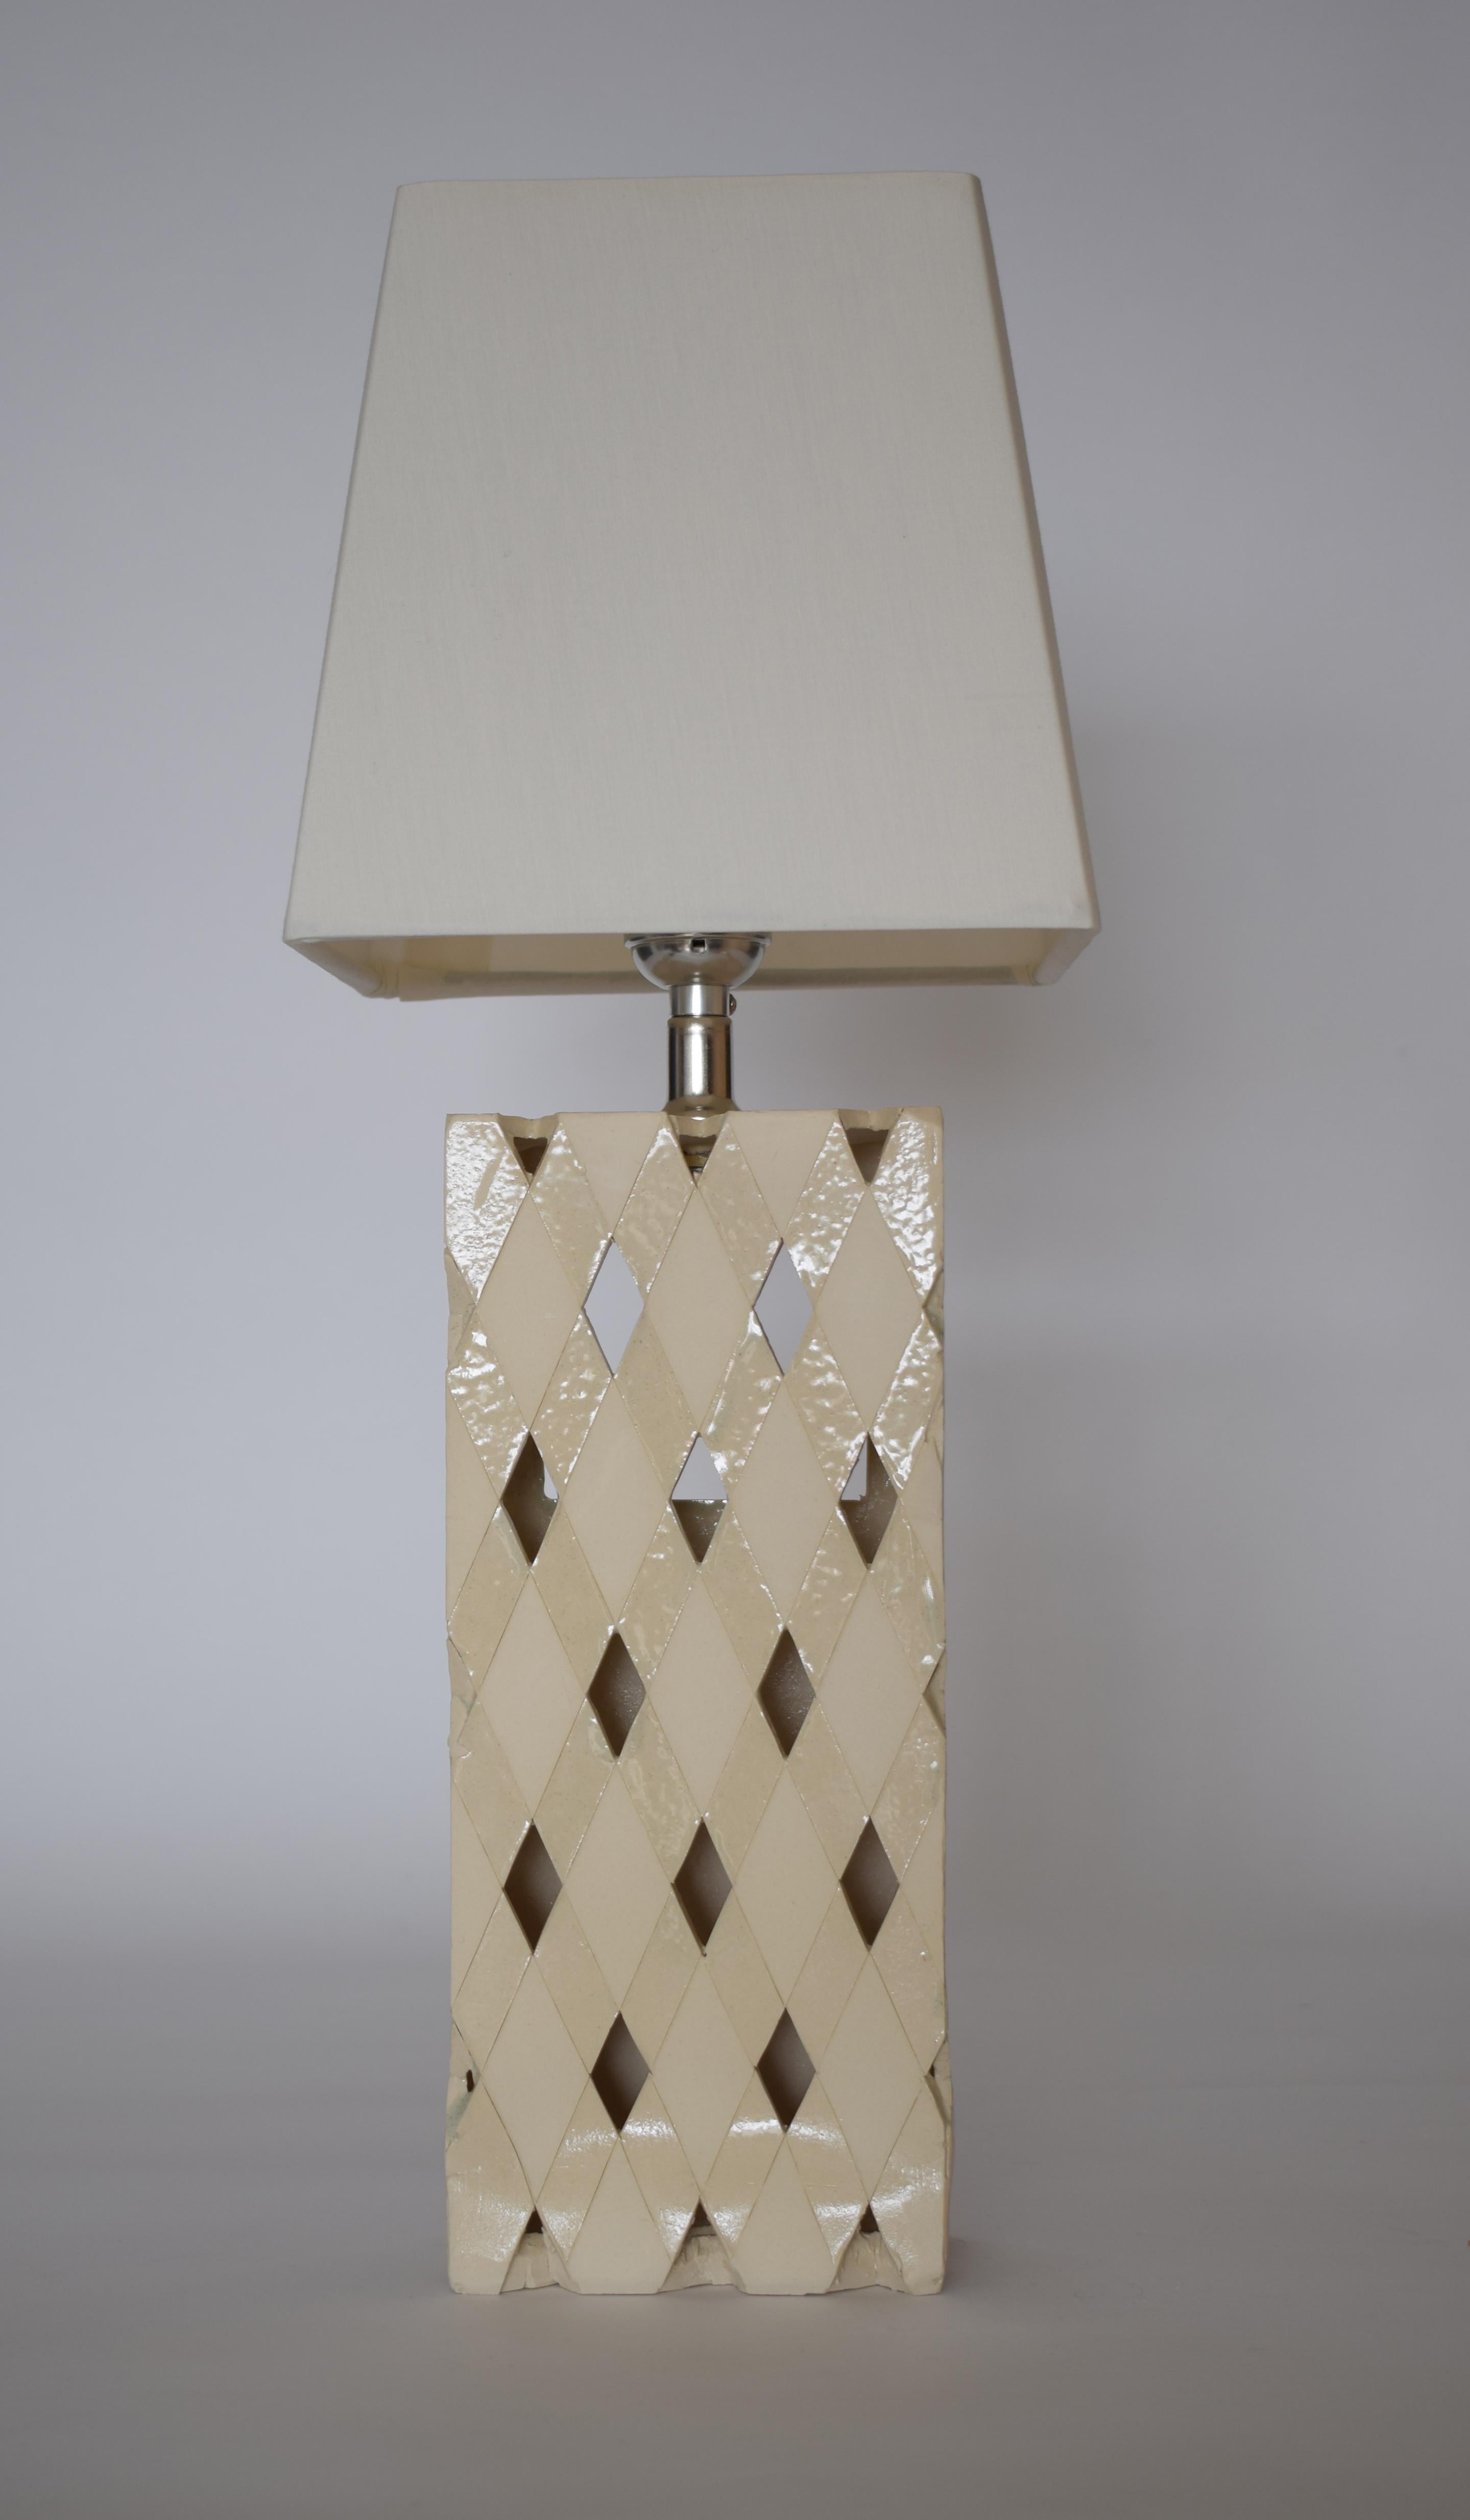 Introducing our stunning architectural lamp, inspired by the iconic Hearst building in NYC. Crafted with precision and sophistication, this one-of-a-kind piece features a rectangular clay prism adorned with an array of diamond openings. Drawing